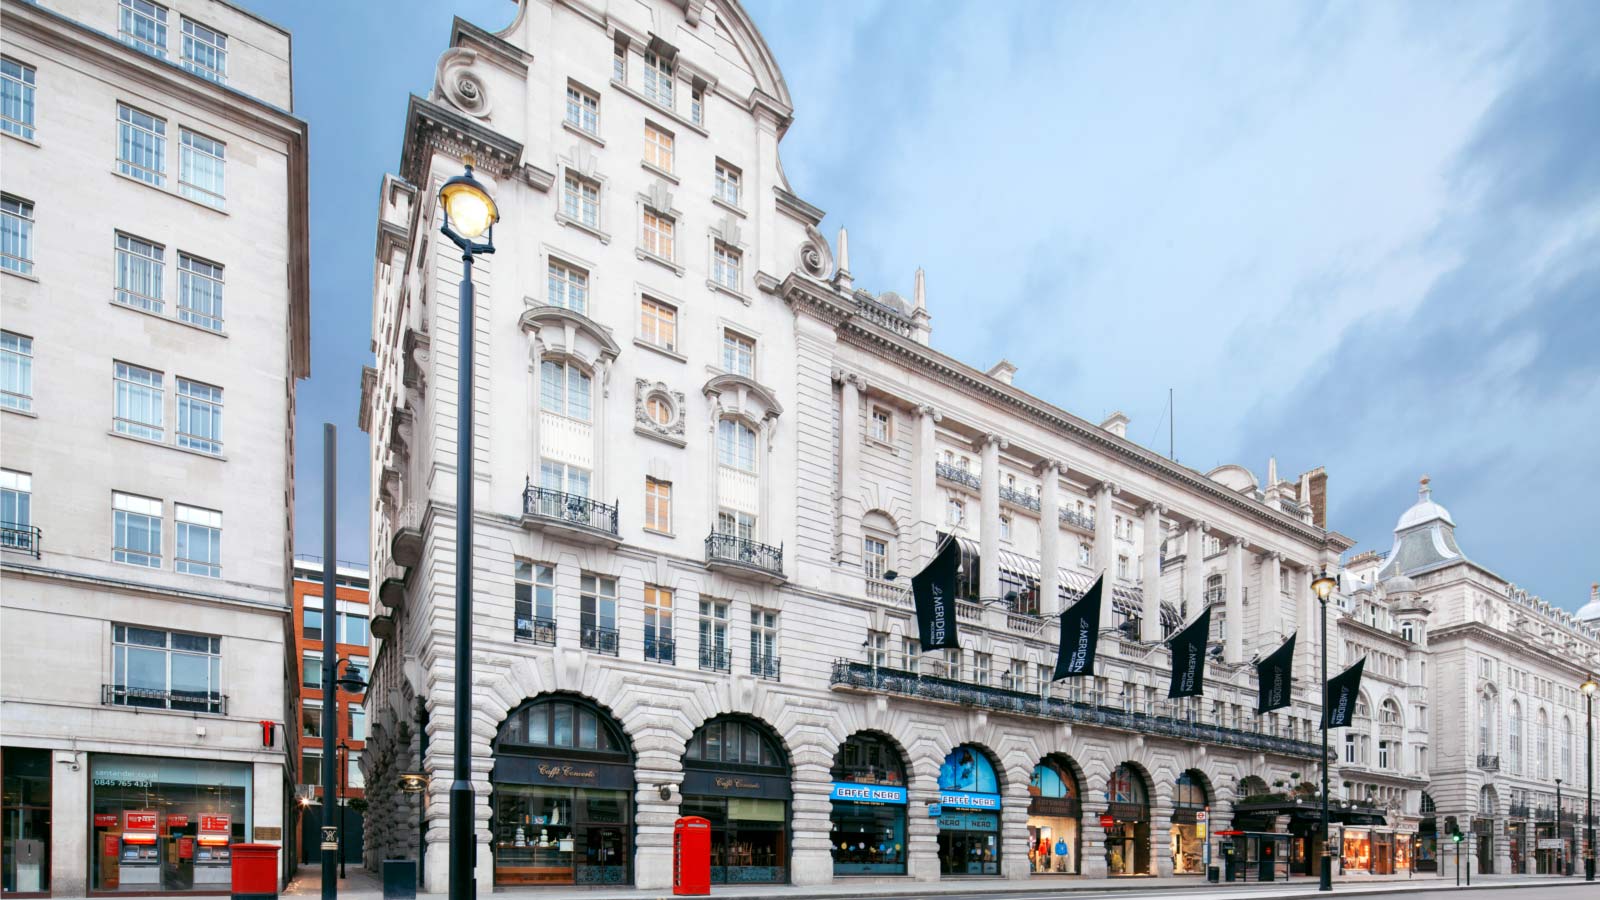 Le Meridien Piccadilly london hotel review